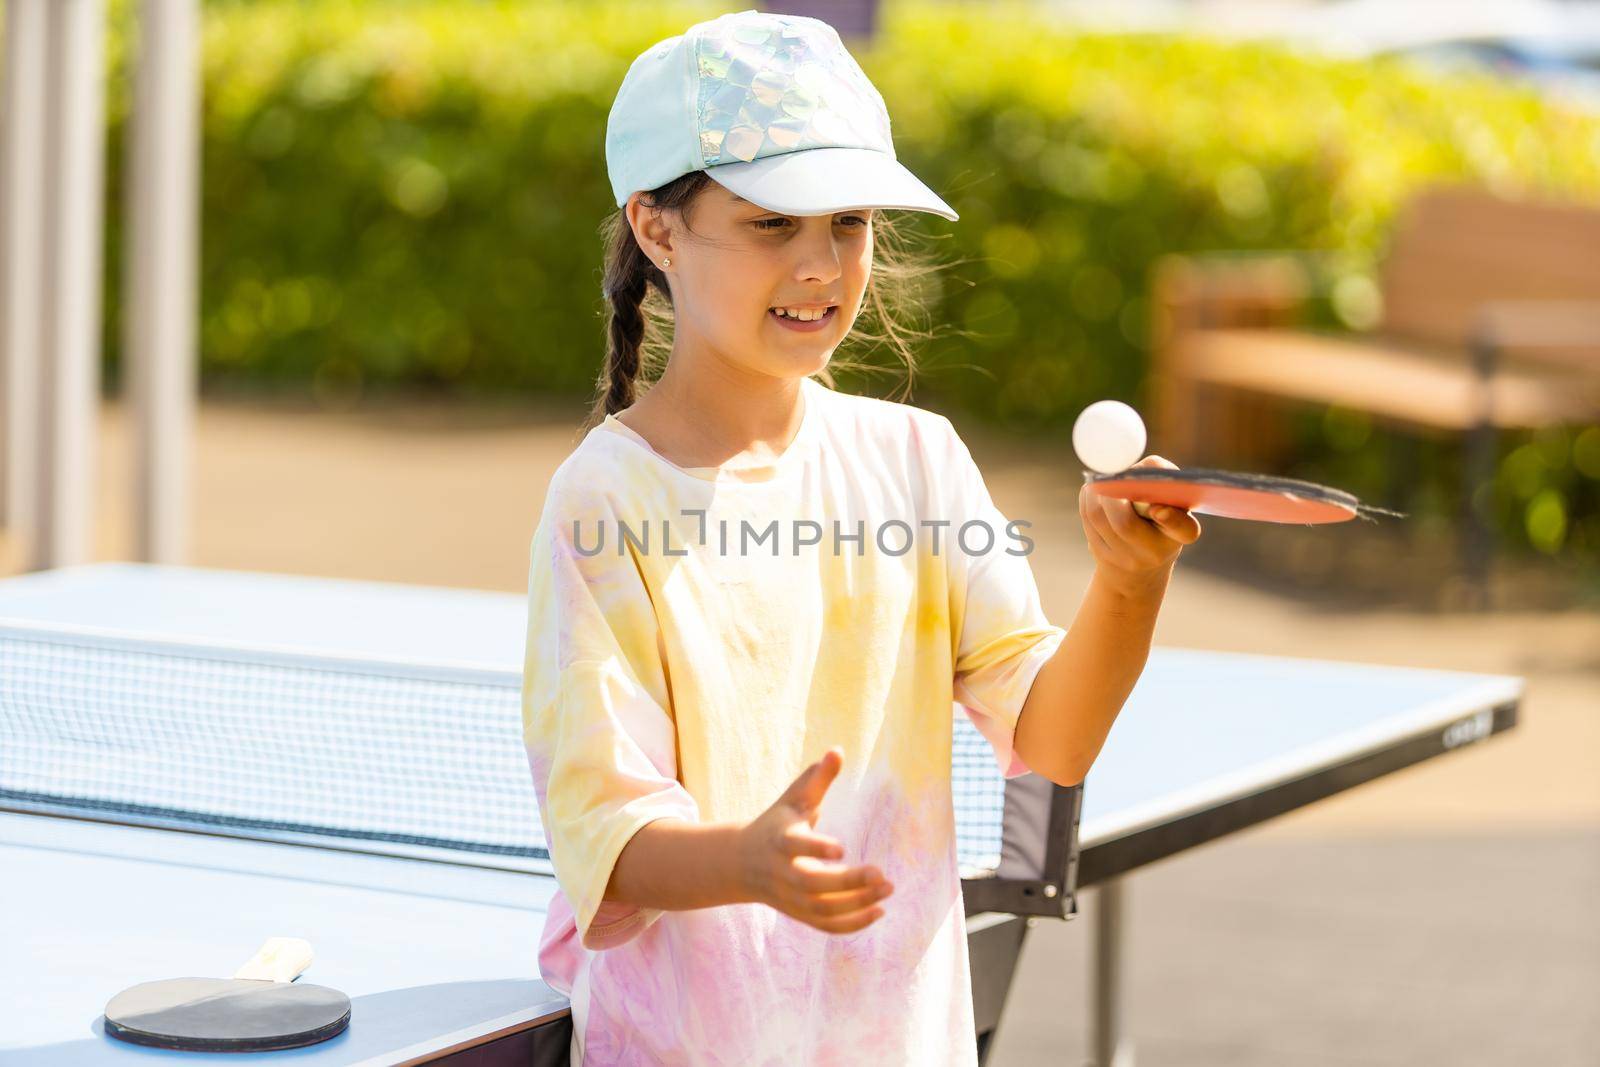 Young teenager girl playing ping pong. She holds a ball and a racket in her hands. Playing table tennis outdoors in the yard